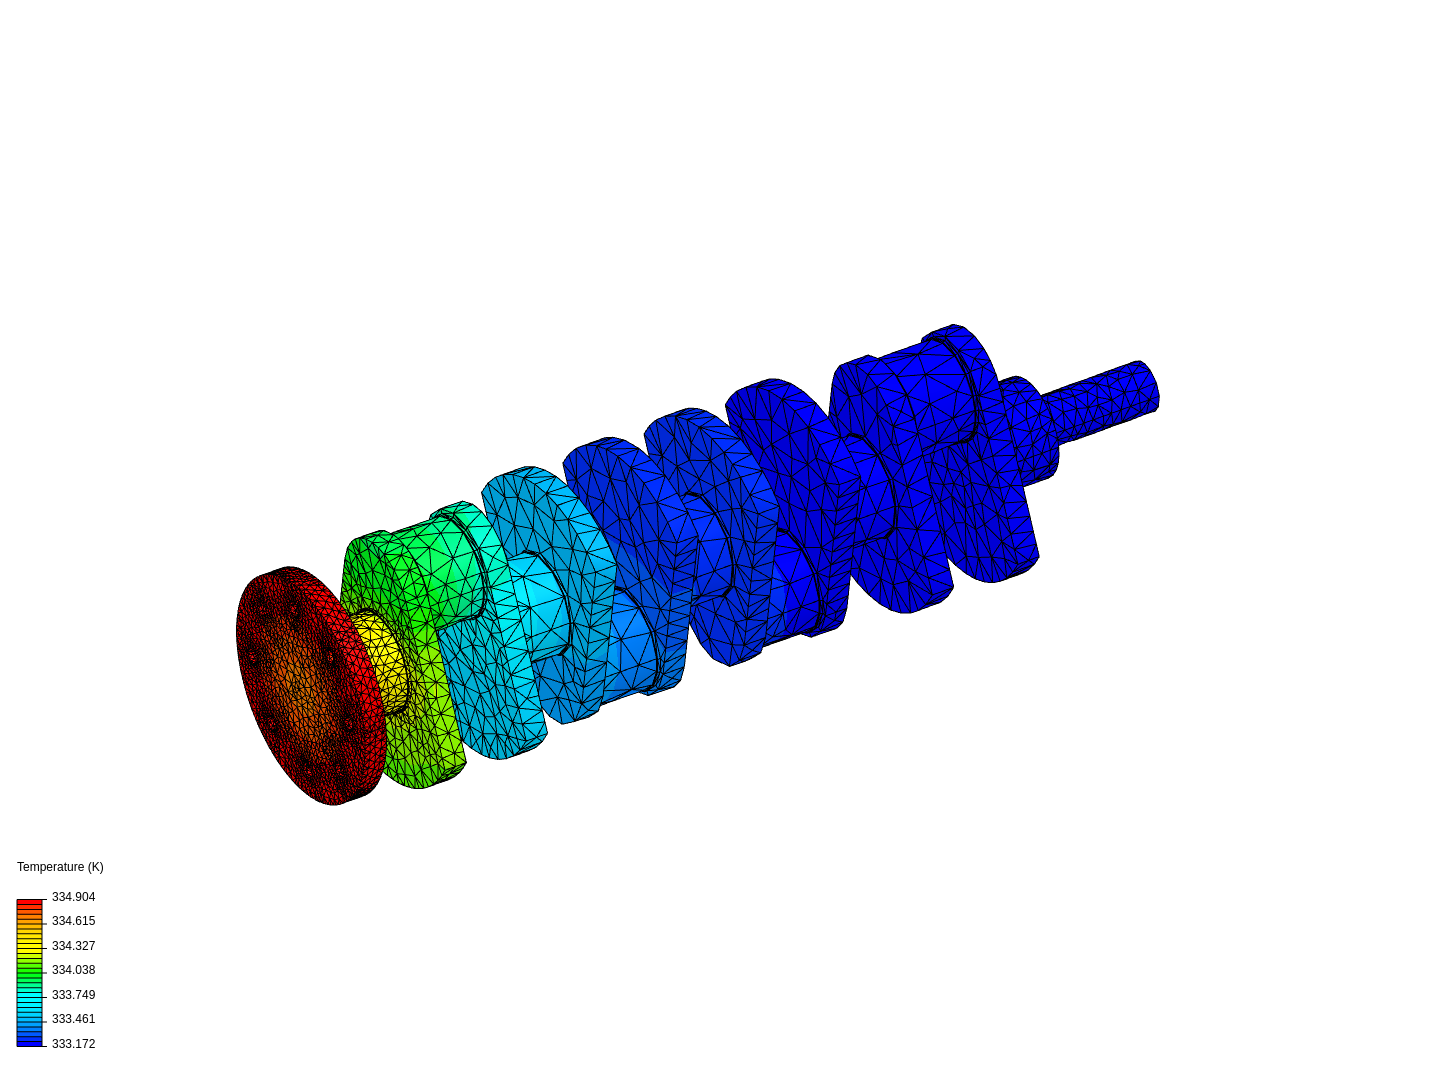 Camshaft Structural Analysis image